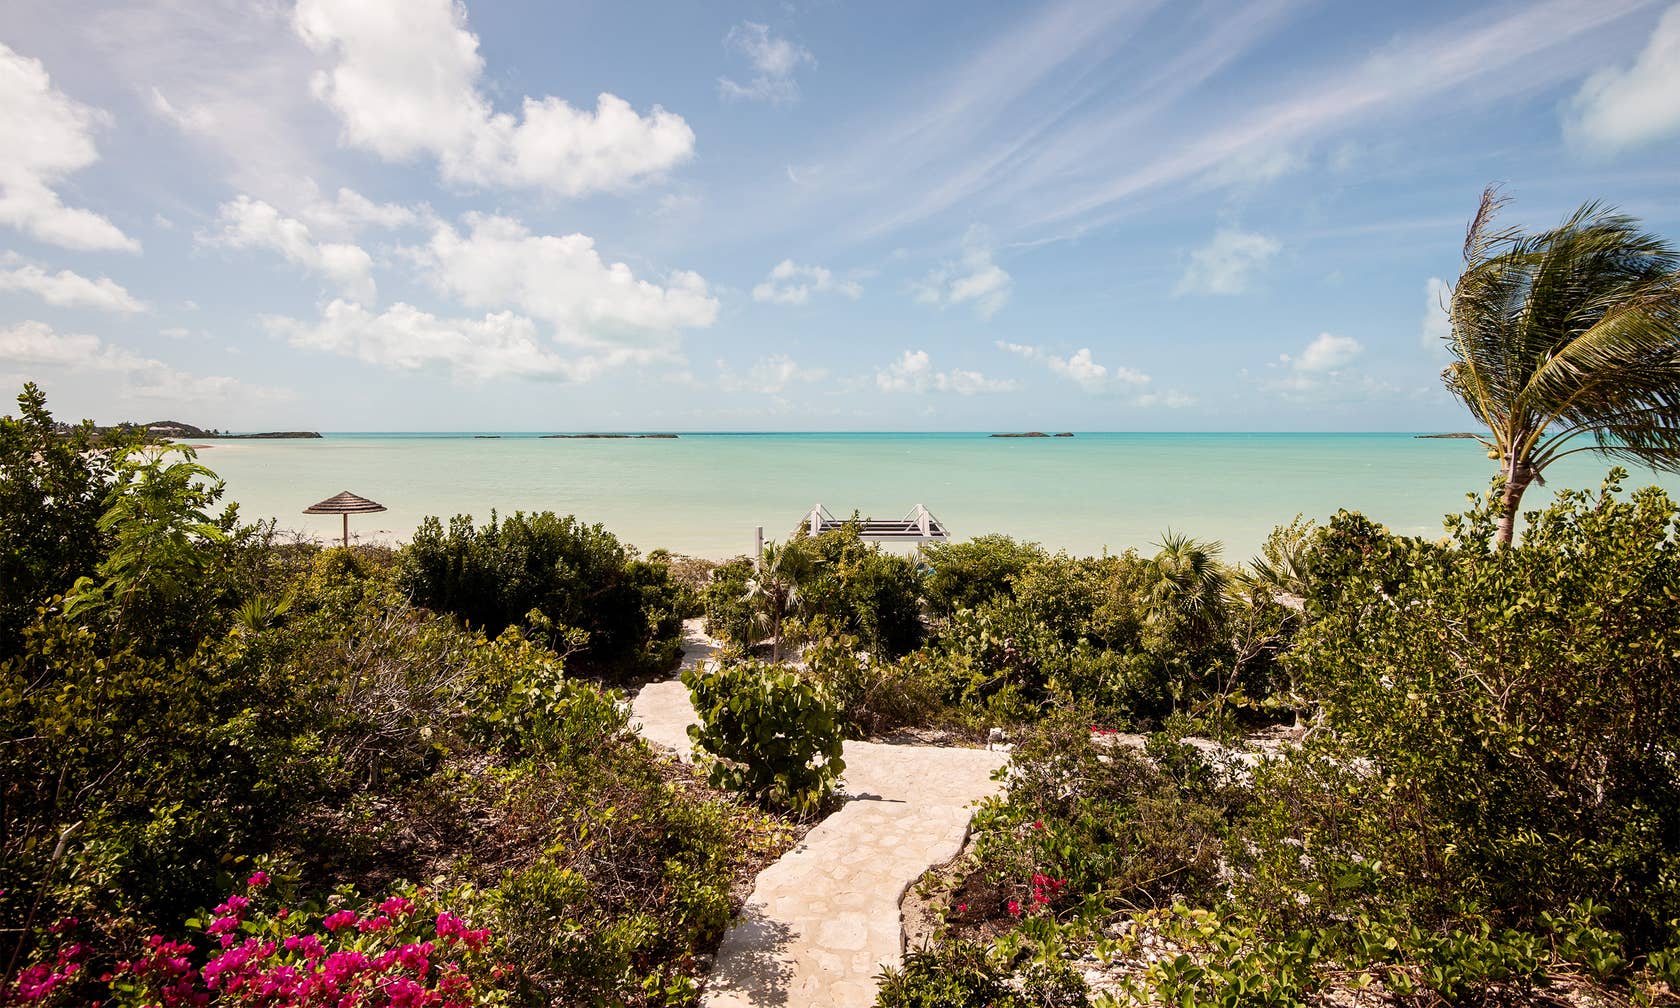 Holiday rentals in Turks and Caicos Islands